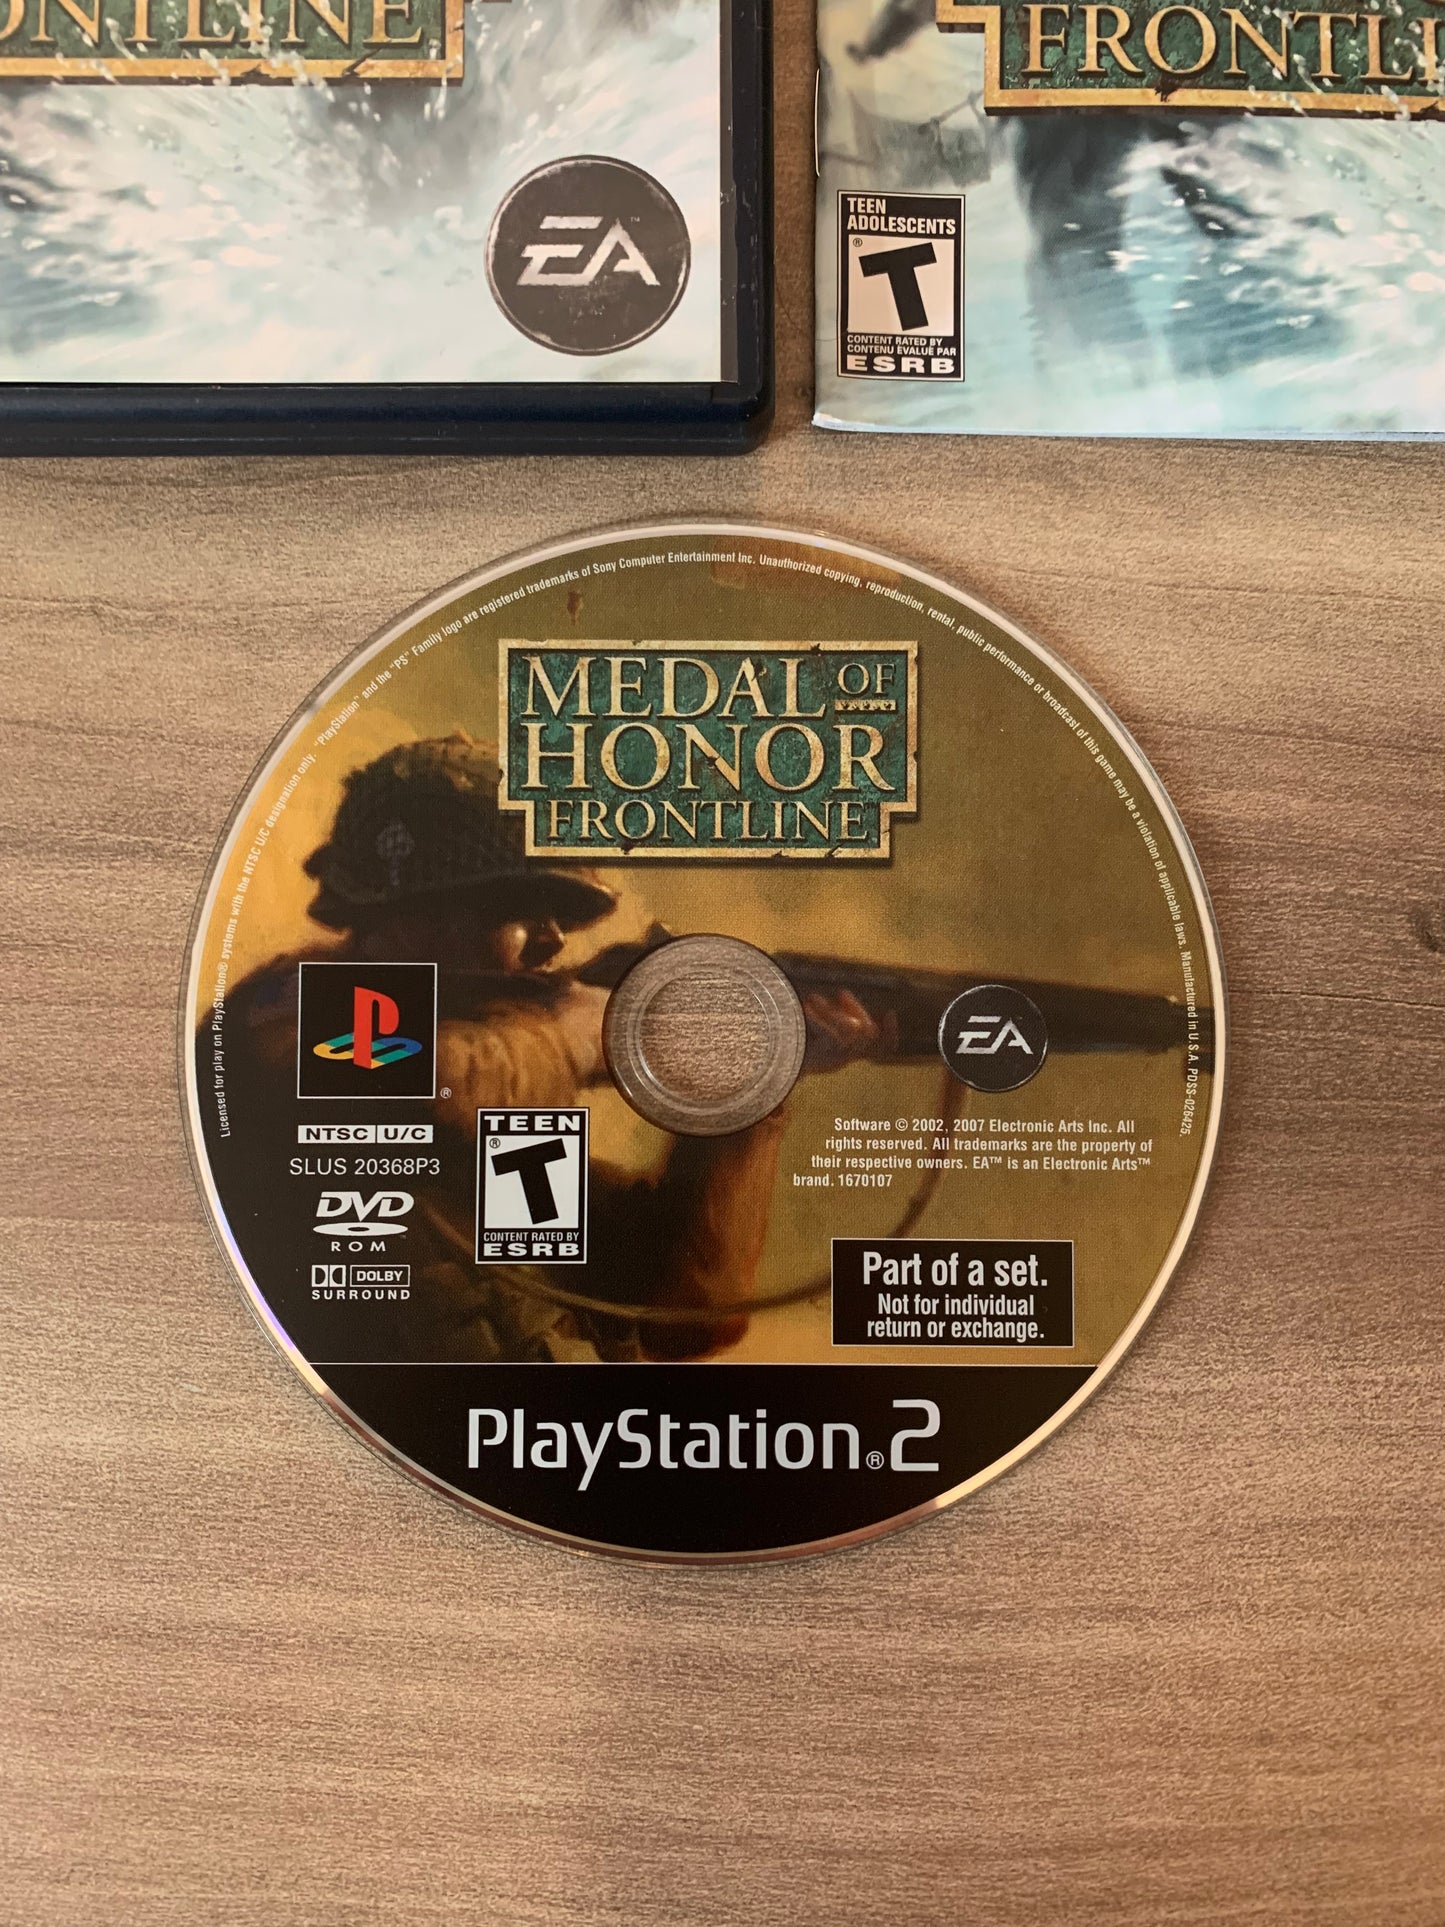 SONY PLAYSTATiON 2 [PS2] | MEDAL OF HONOR FRONT Line